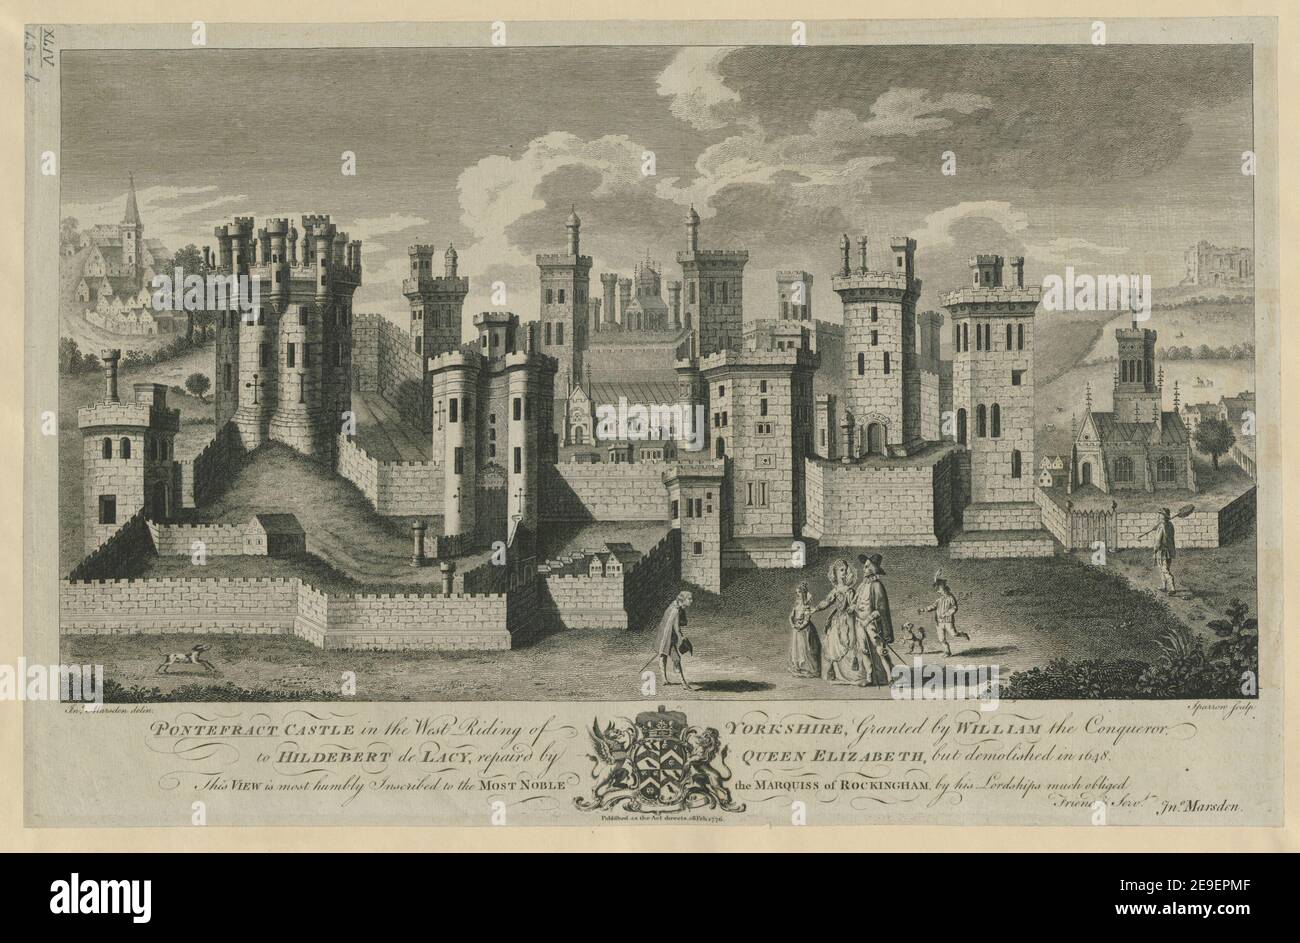 PONTEFRACT CASTLE in the West Riding of YORKSHIRE, Granted by WILLIAM the Conqueror, to HILDEBERT de LACY, repair'd by QUEEN ELIZABETH, but demolished in 1648.  Author  Sparrow, S. 44.43.h. Place of publication: [London] Publisher: Published as the Act directs 28 Feb., Date of publication: 1776.  Item type: 1 print Medium: etching Dimensions: platemark 32.8 x 51.1 cm.  Former owner: George III, King of Great Britain, 1738-1820 Stock Photo